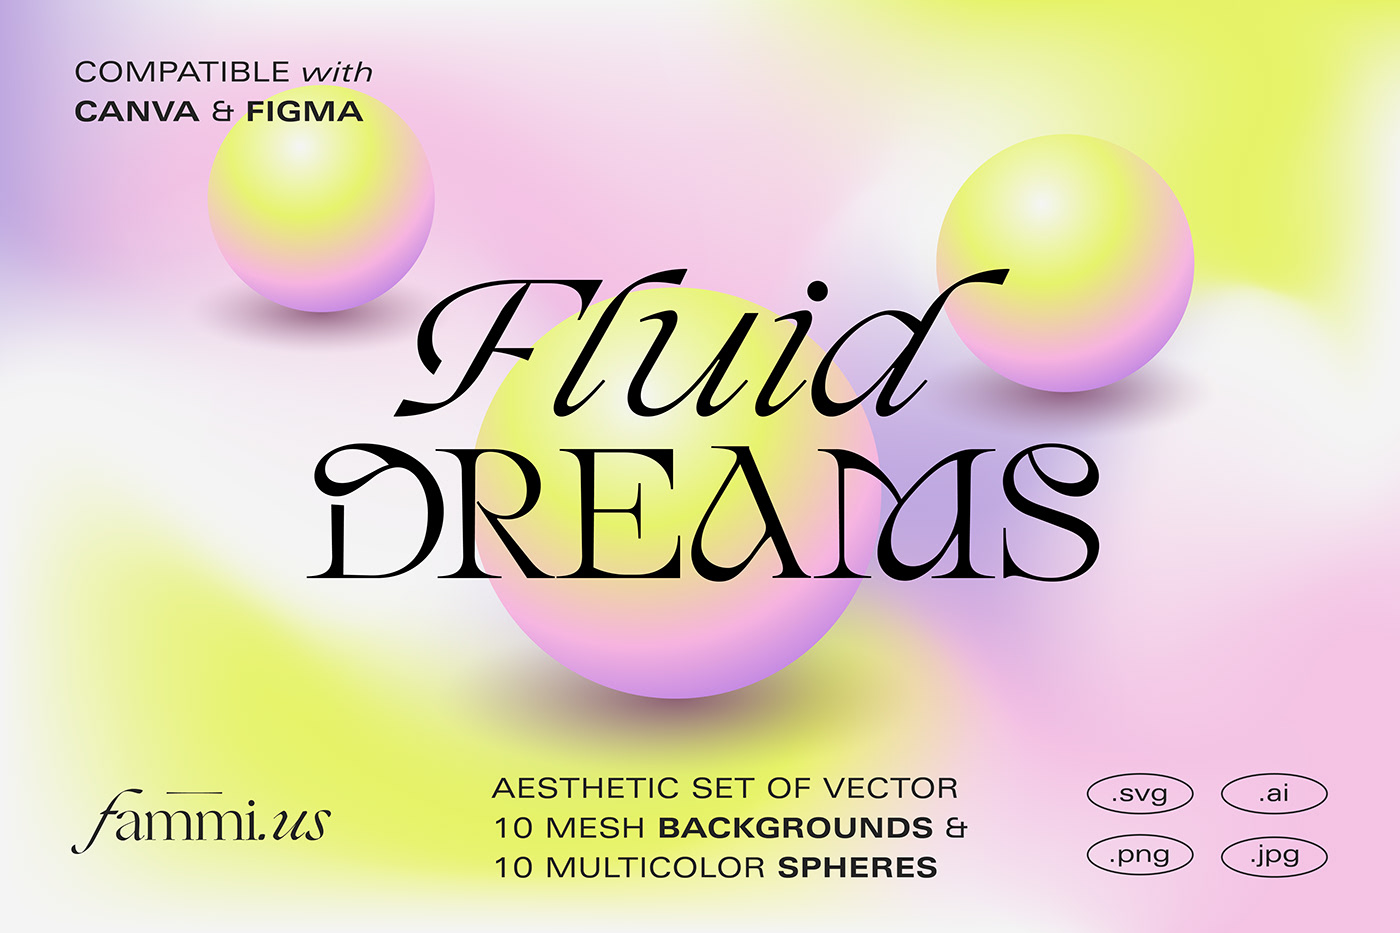 Fluid Dreams aesthetic set of vector mesh backgrounds and multicolor spheres